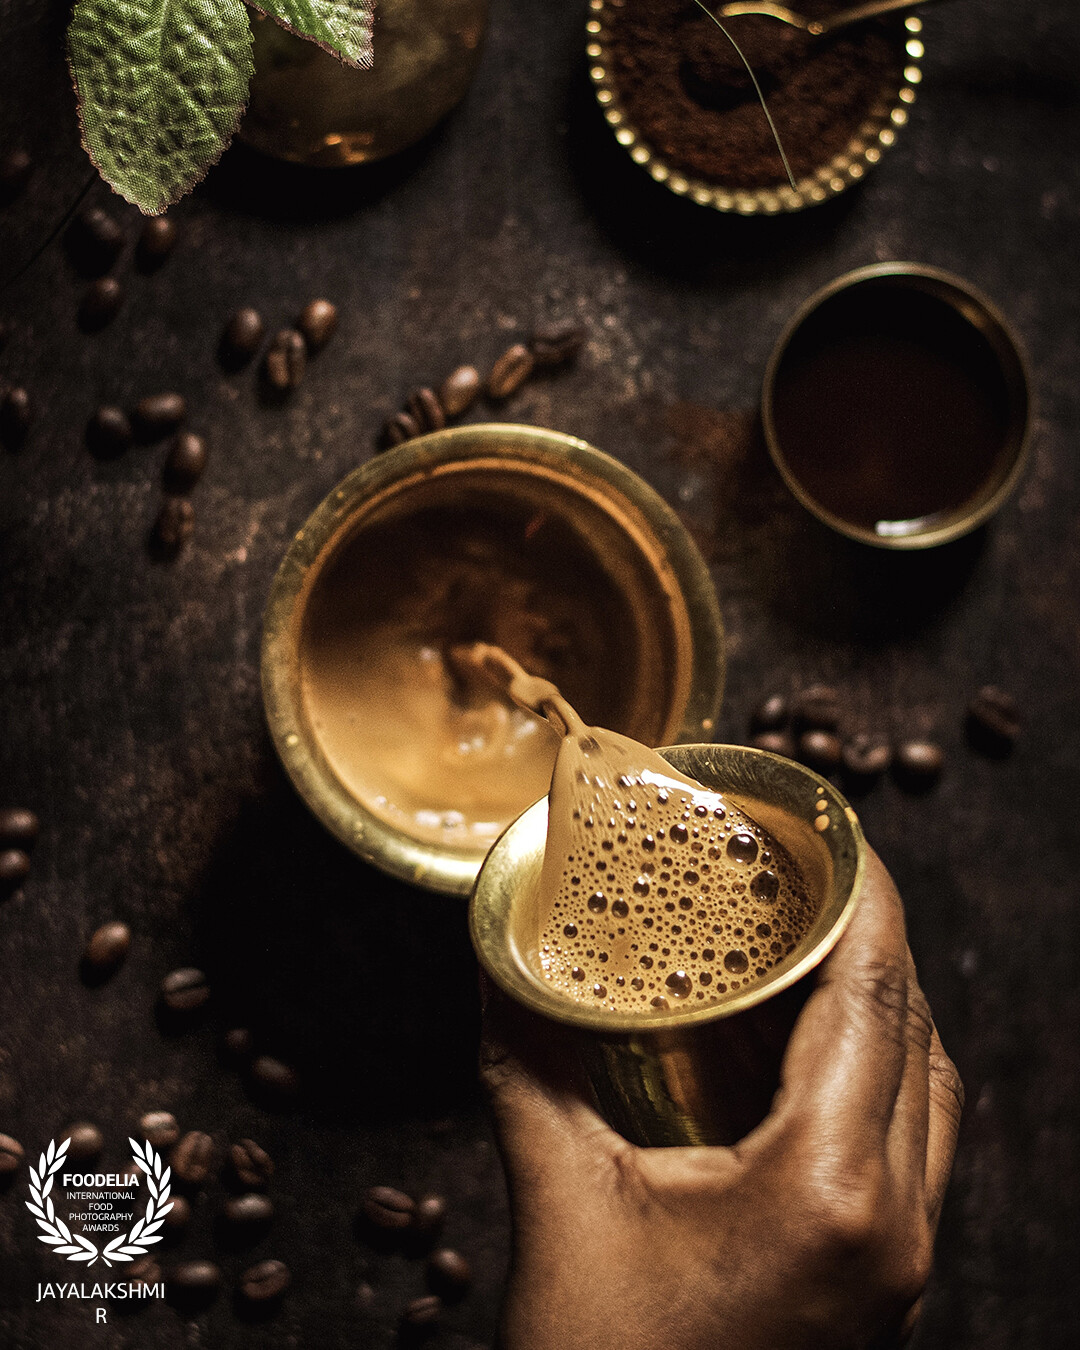 A typical morning scene in a South-Indian household . Filter coffee is a specialty back home .